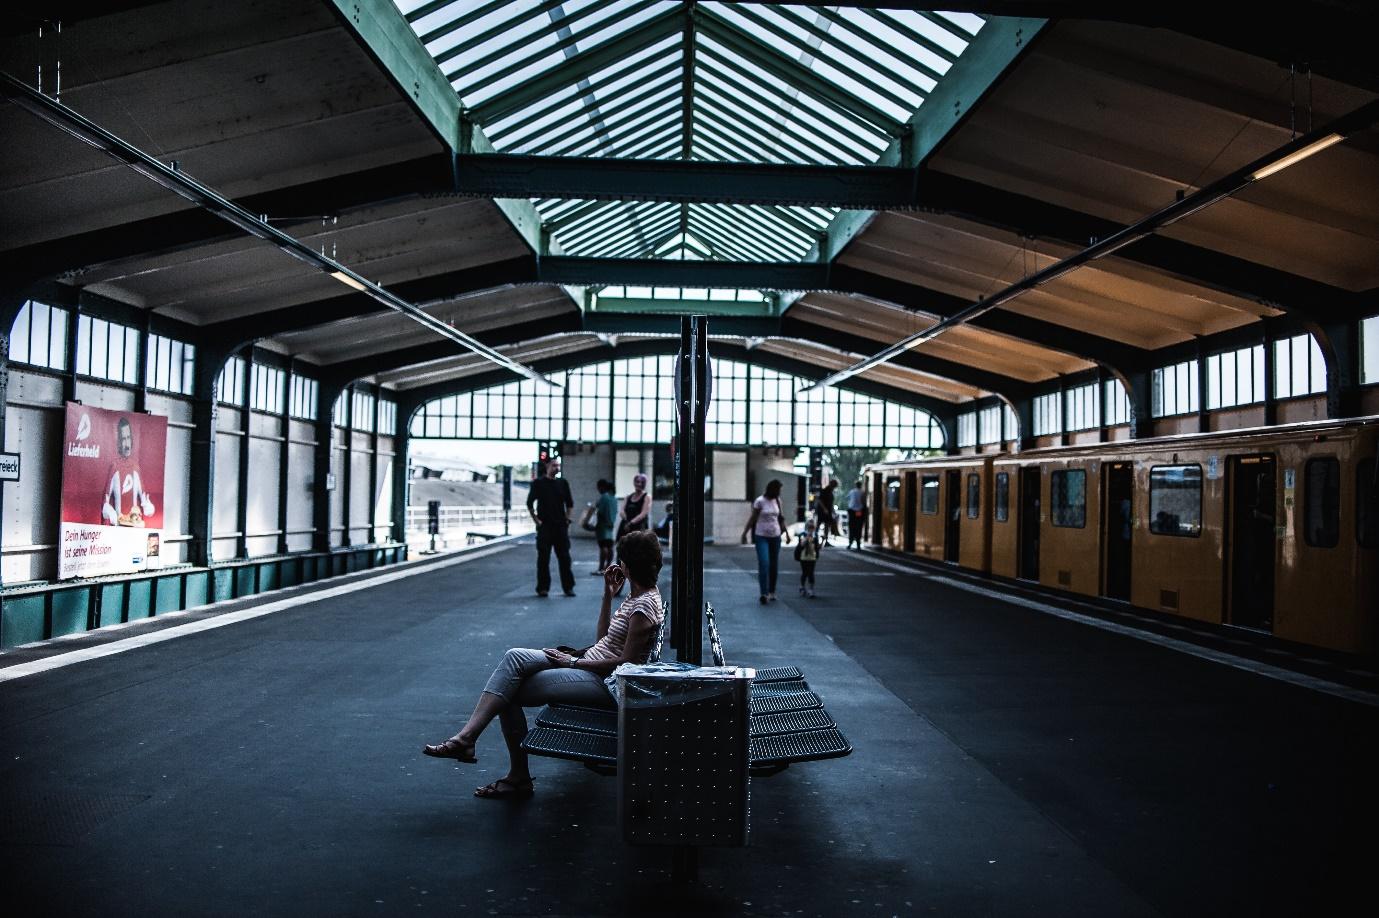 A person sitting on a bench in a train station

Description automatically generated with medium confidence